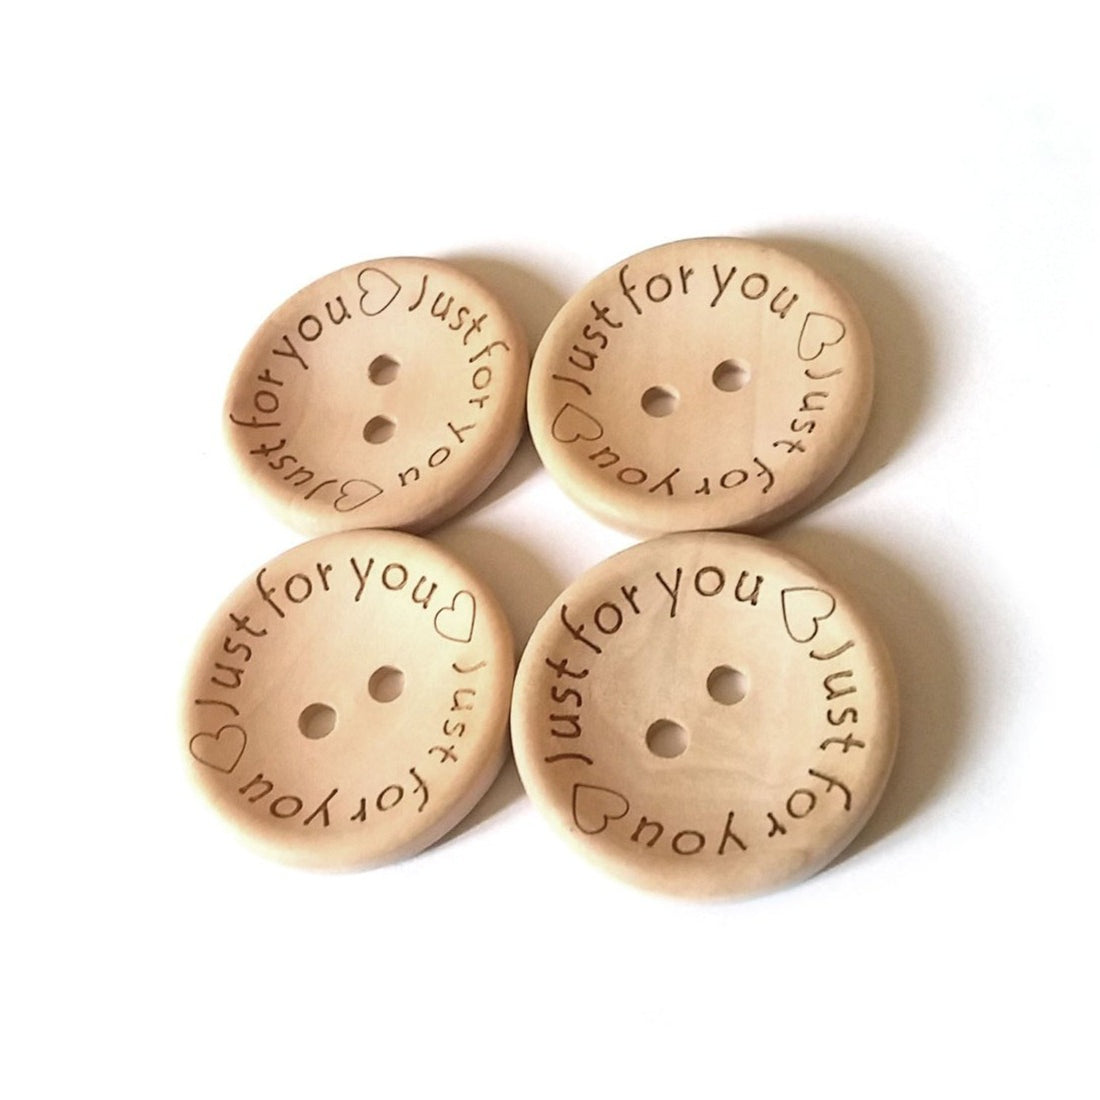 4 Natural unfinished wood button with Just for You logo engraved